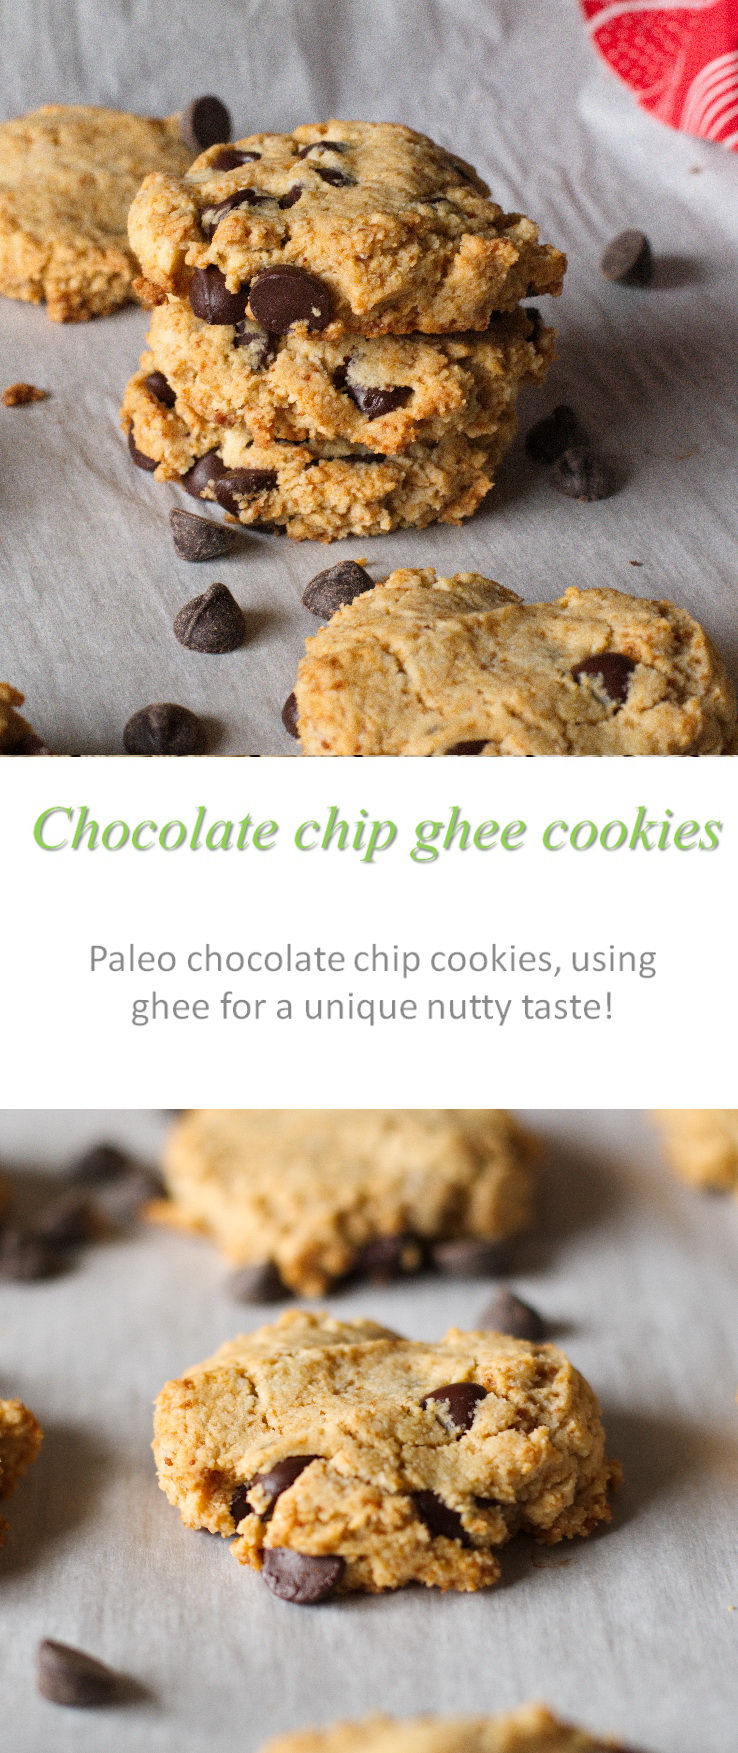 Chocolate chip ghee cookies - who would have known such an amazing flavor combination existed?! #ghee